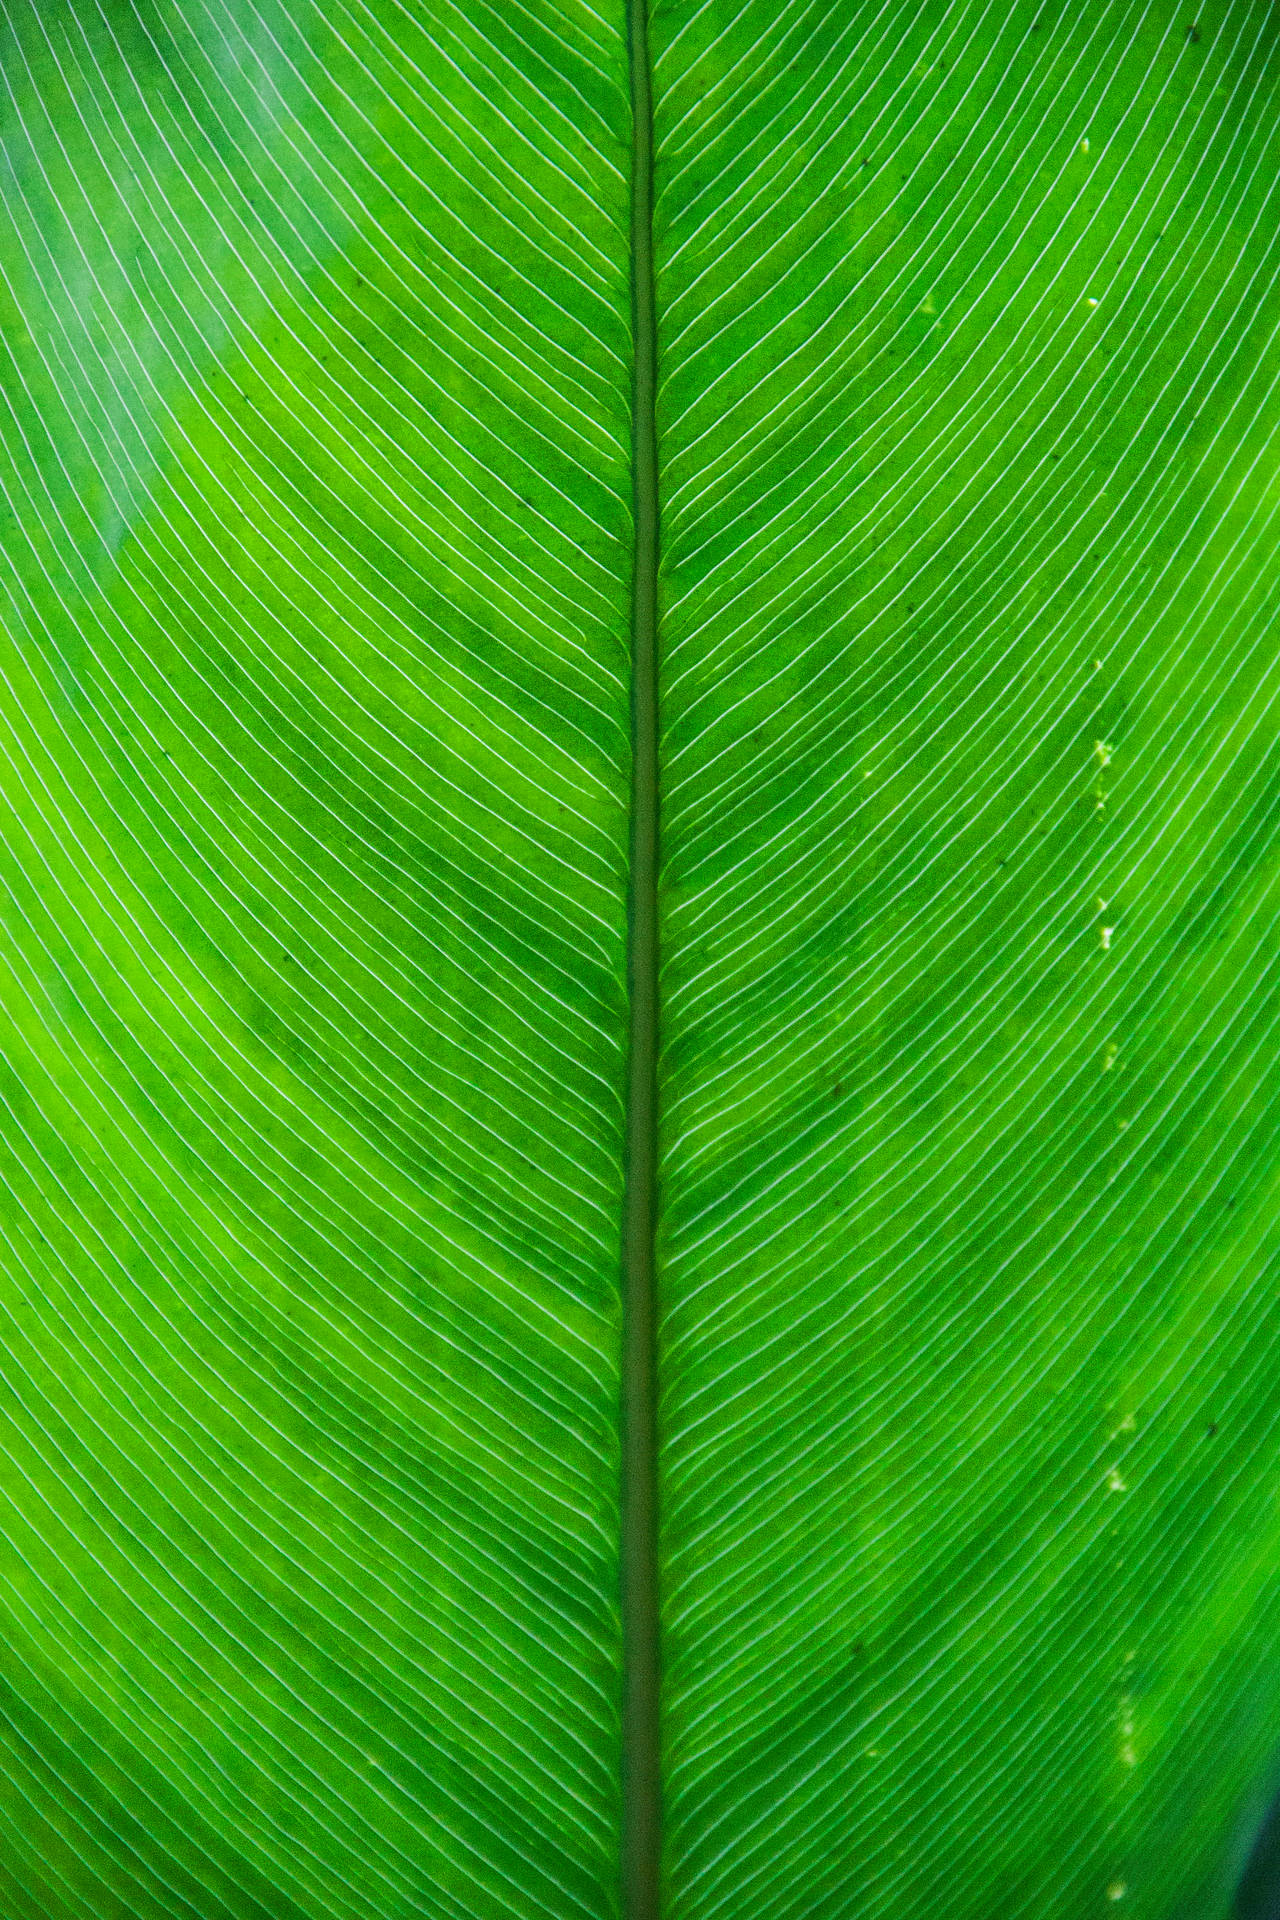 Banana Leaf 2267X3401 Wallpaper and Background Image